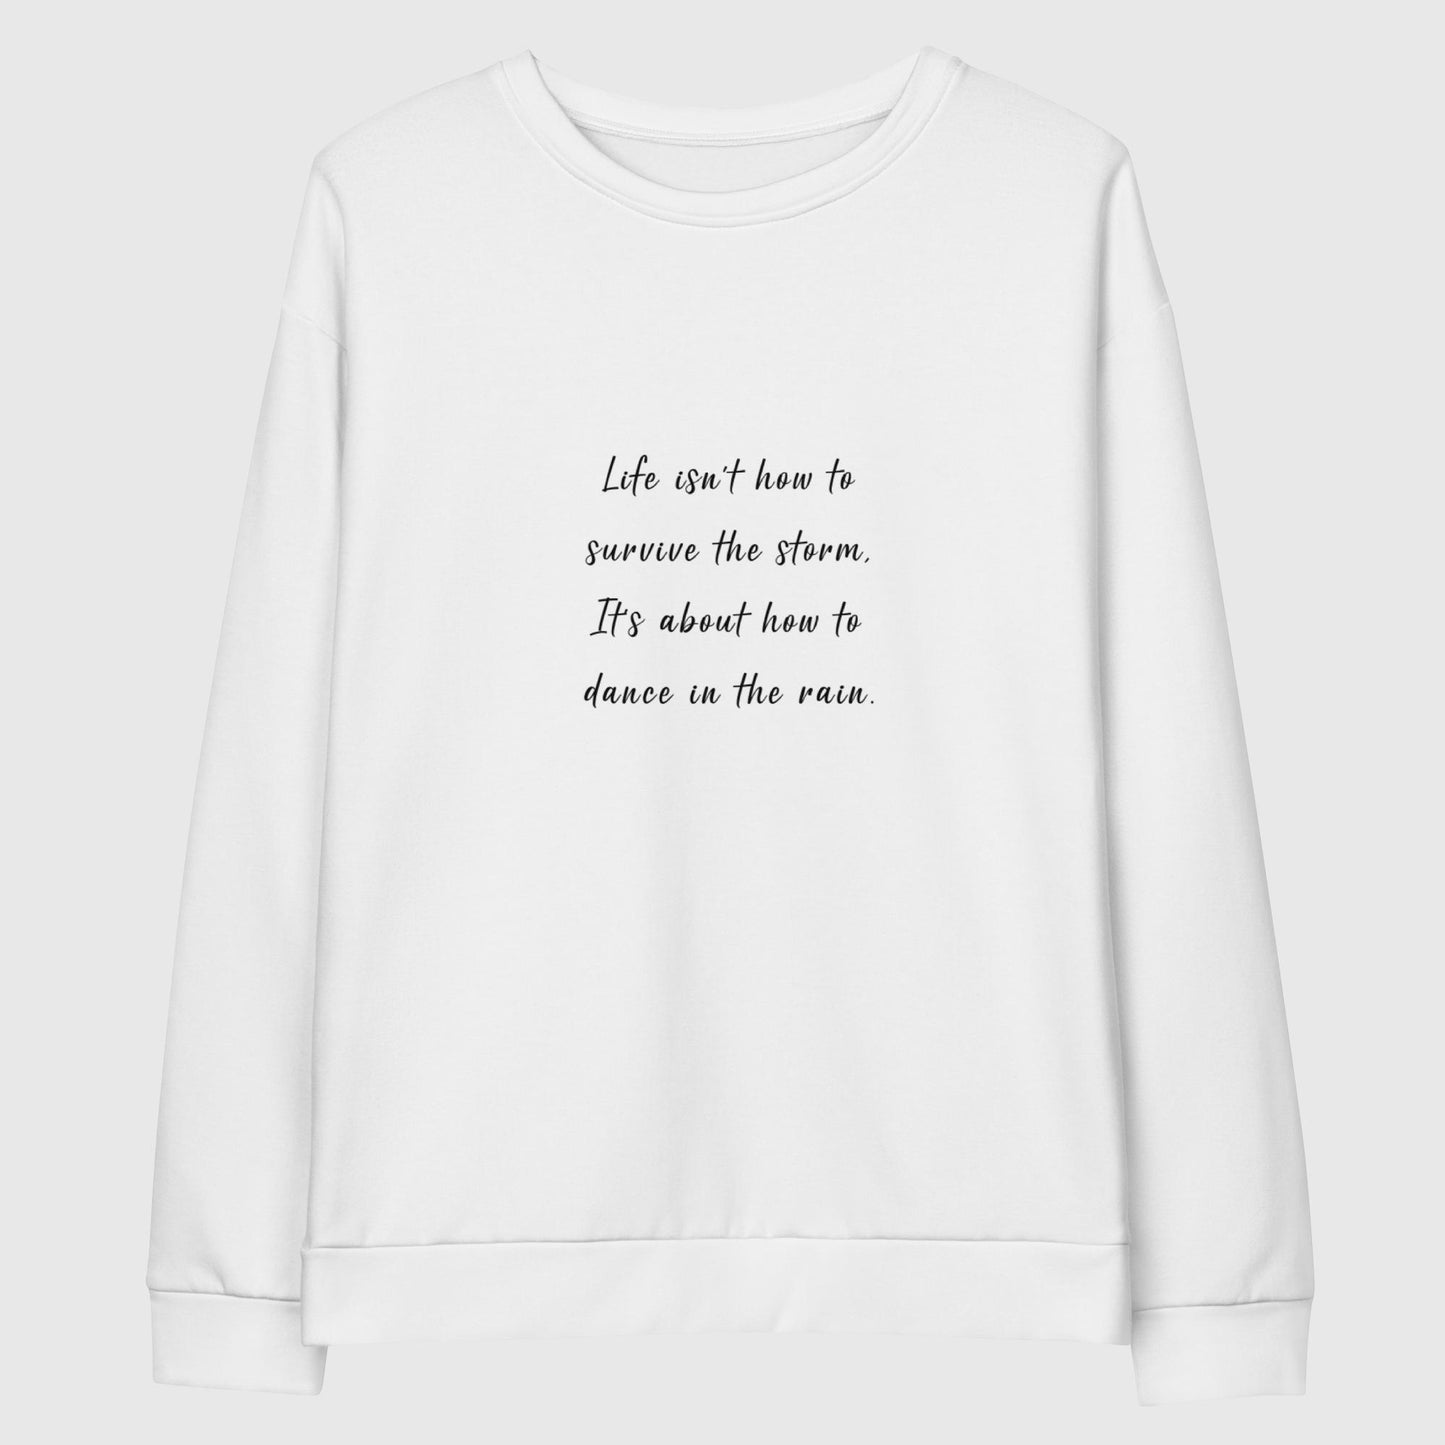 Recycled sweatshirt that features Taylor Swift's quote, "Life isn't how to survive the storm, it's about how to dance in the rain."